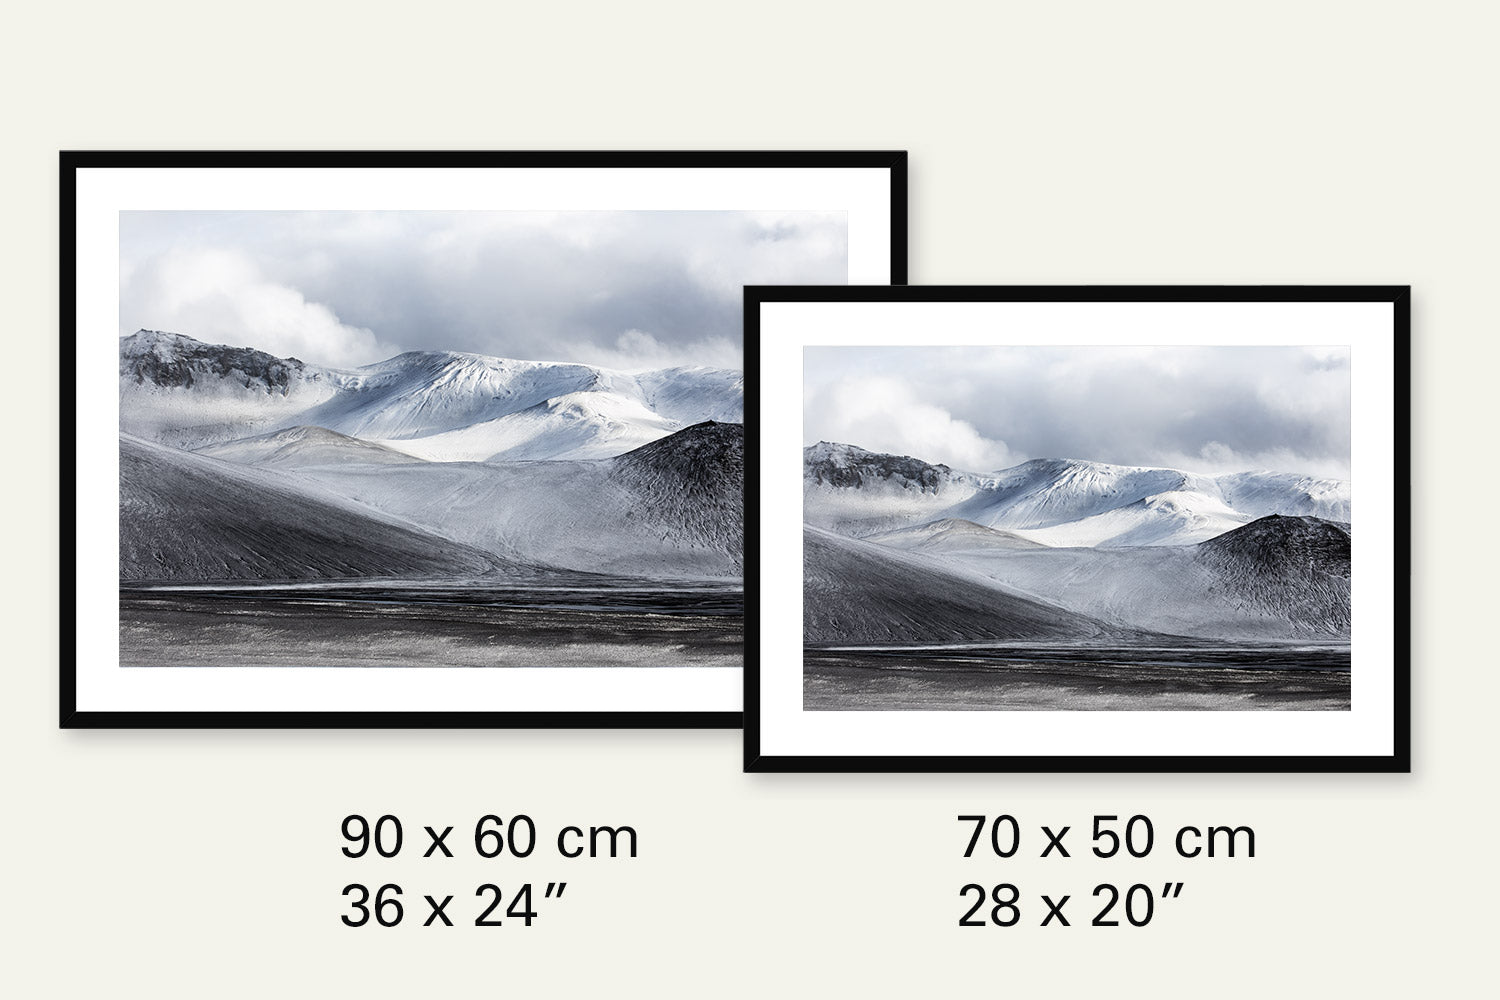 The framed prints are available in two sizes